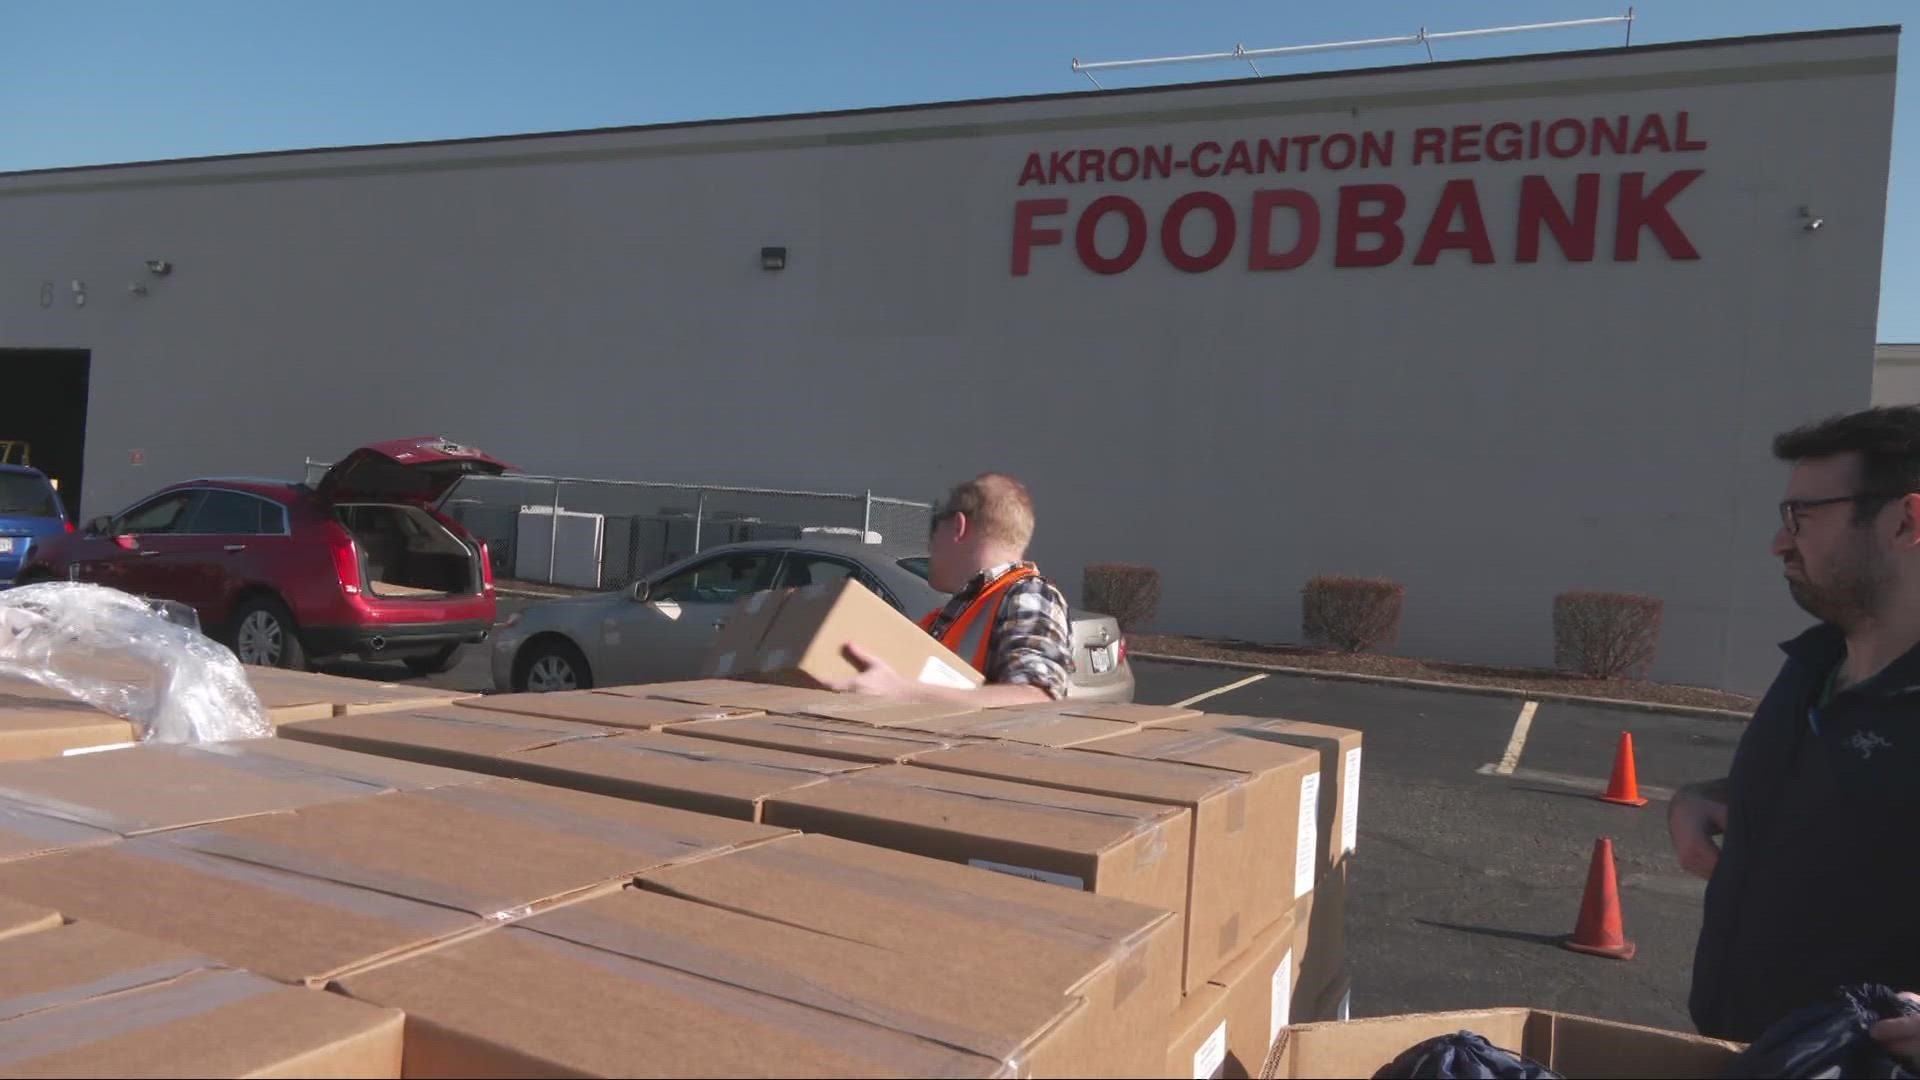 Over its first 40 years, the Akron-Canton Regional Foodbank has distributed more than 560 million pounds of food to the local community.